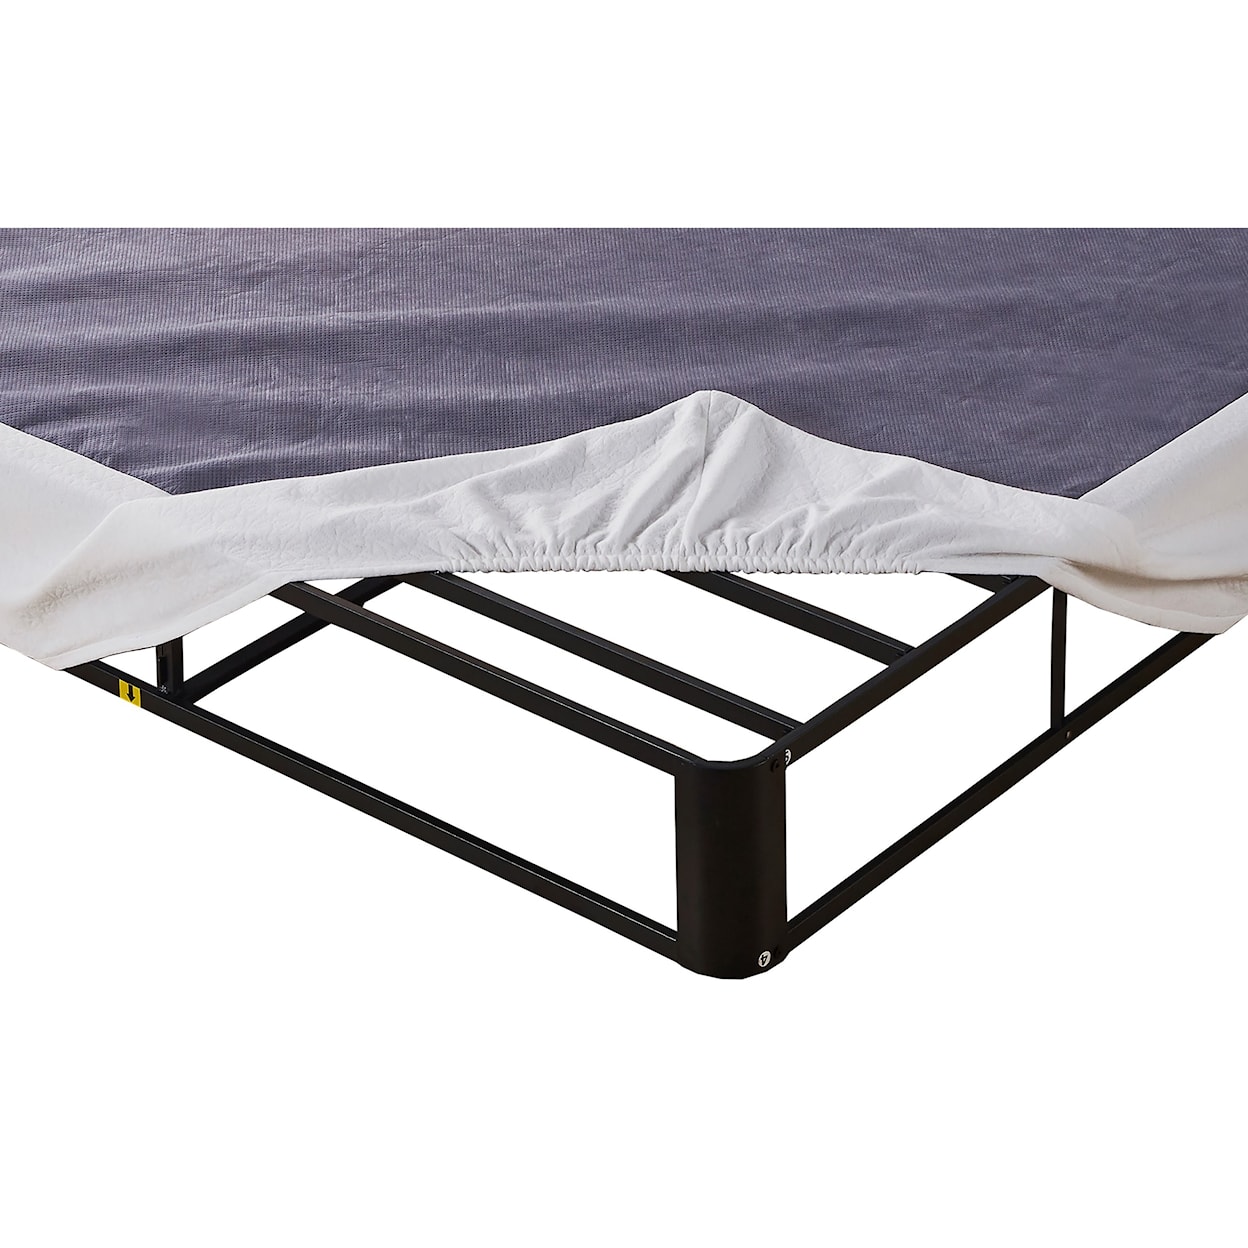 Sierra Sleep M95X Metal Frame Twin XL Metal Foundation; Assembly Required